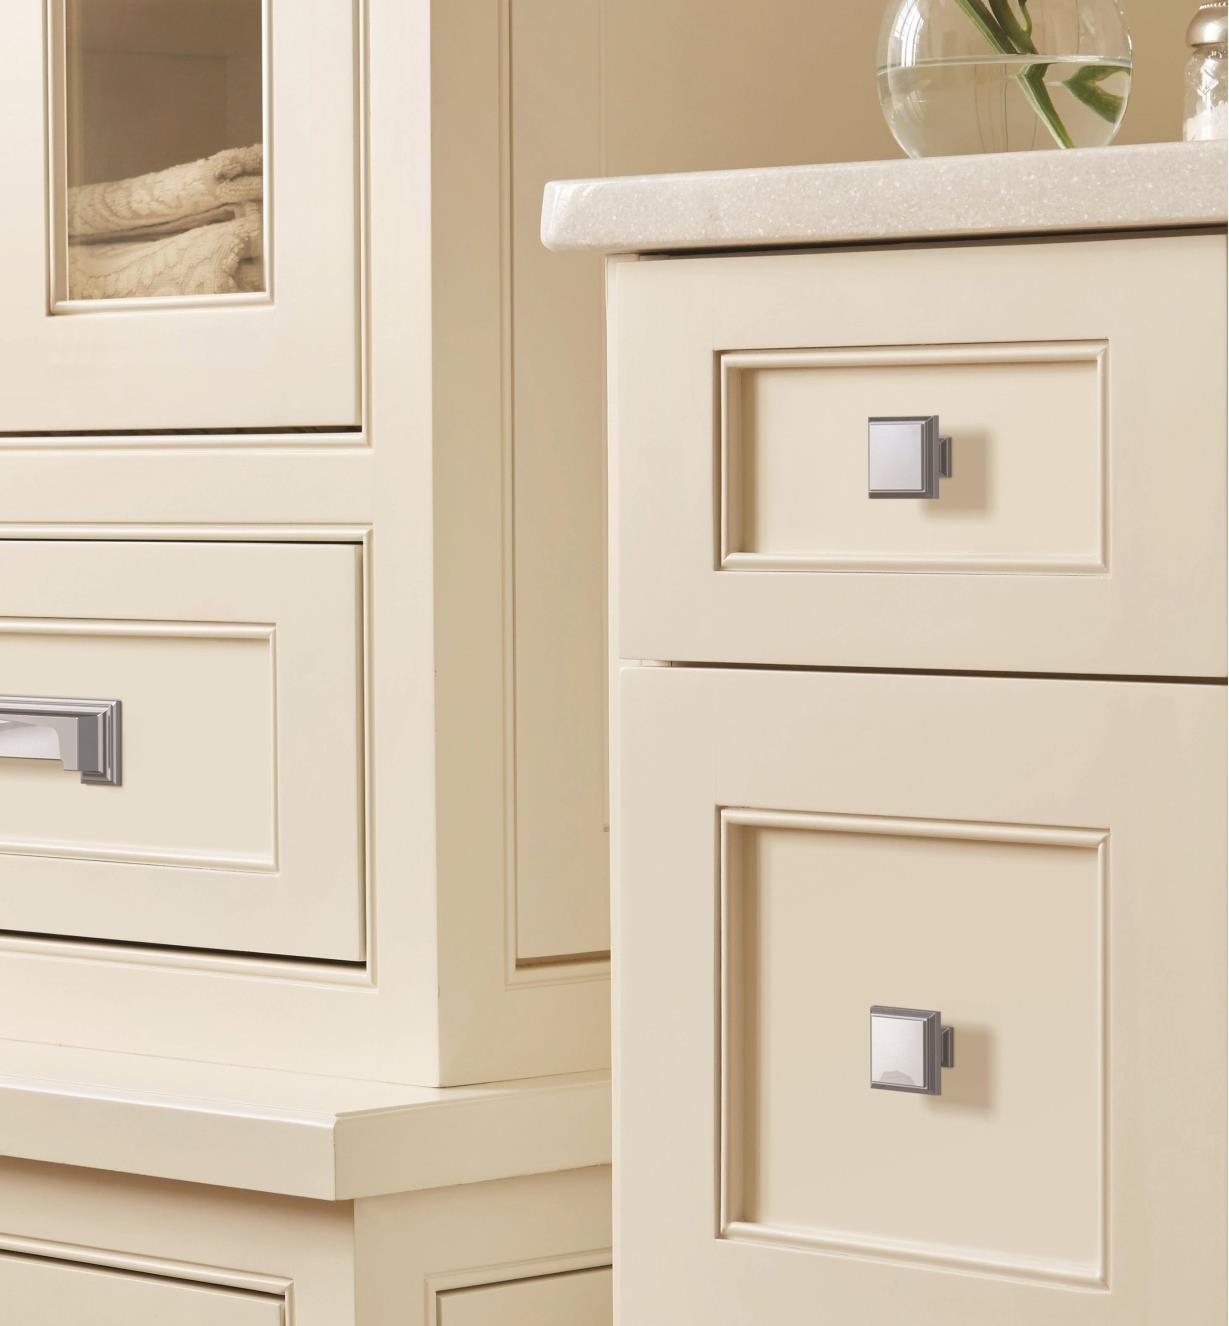 Two polished chrome colored Appoint square knobs are connected to two white colored drawers